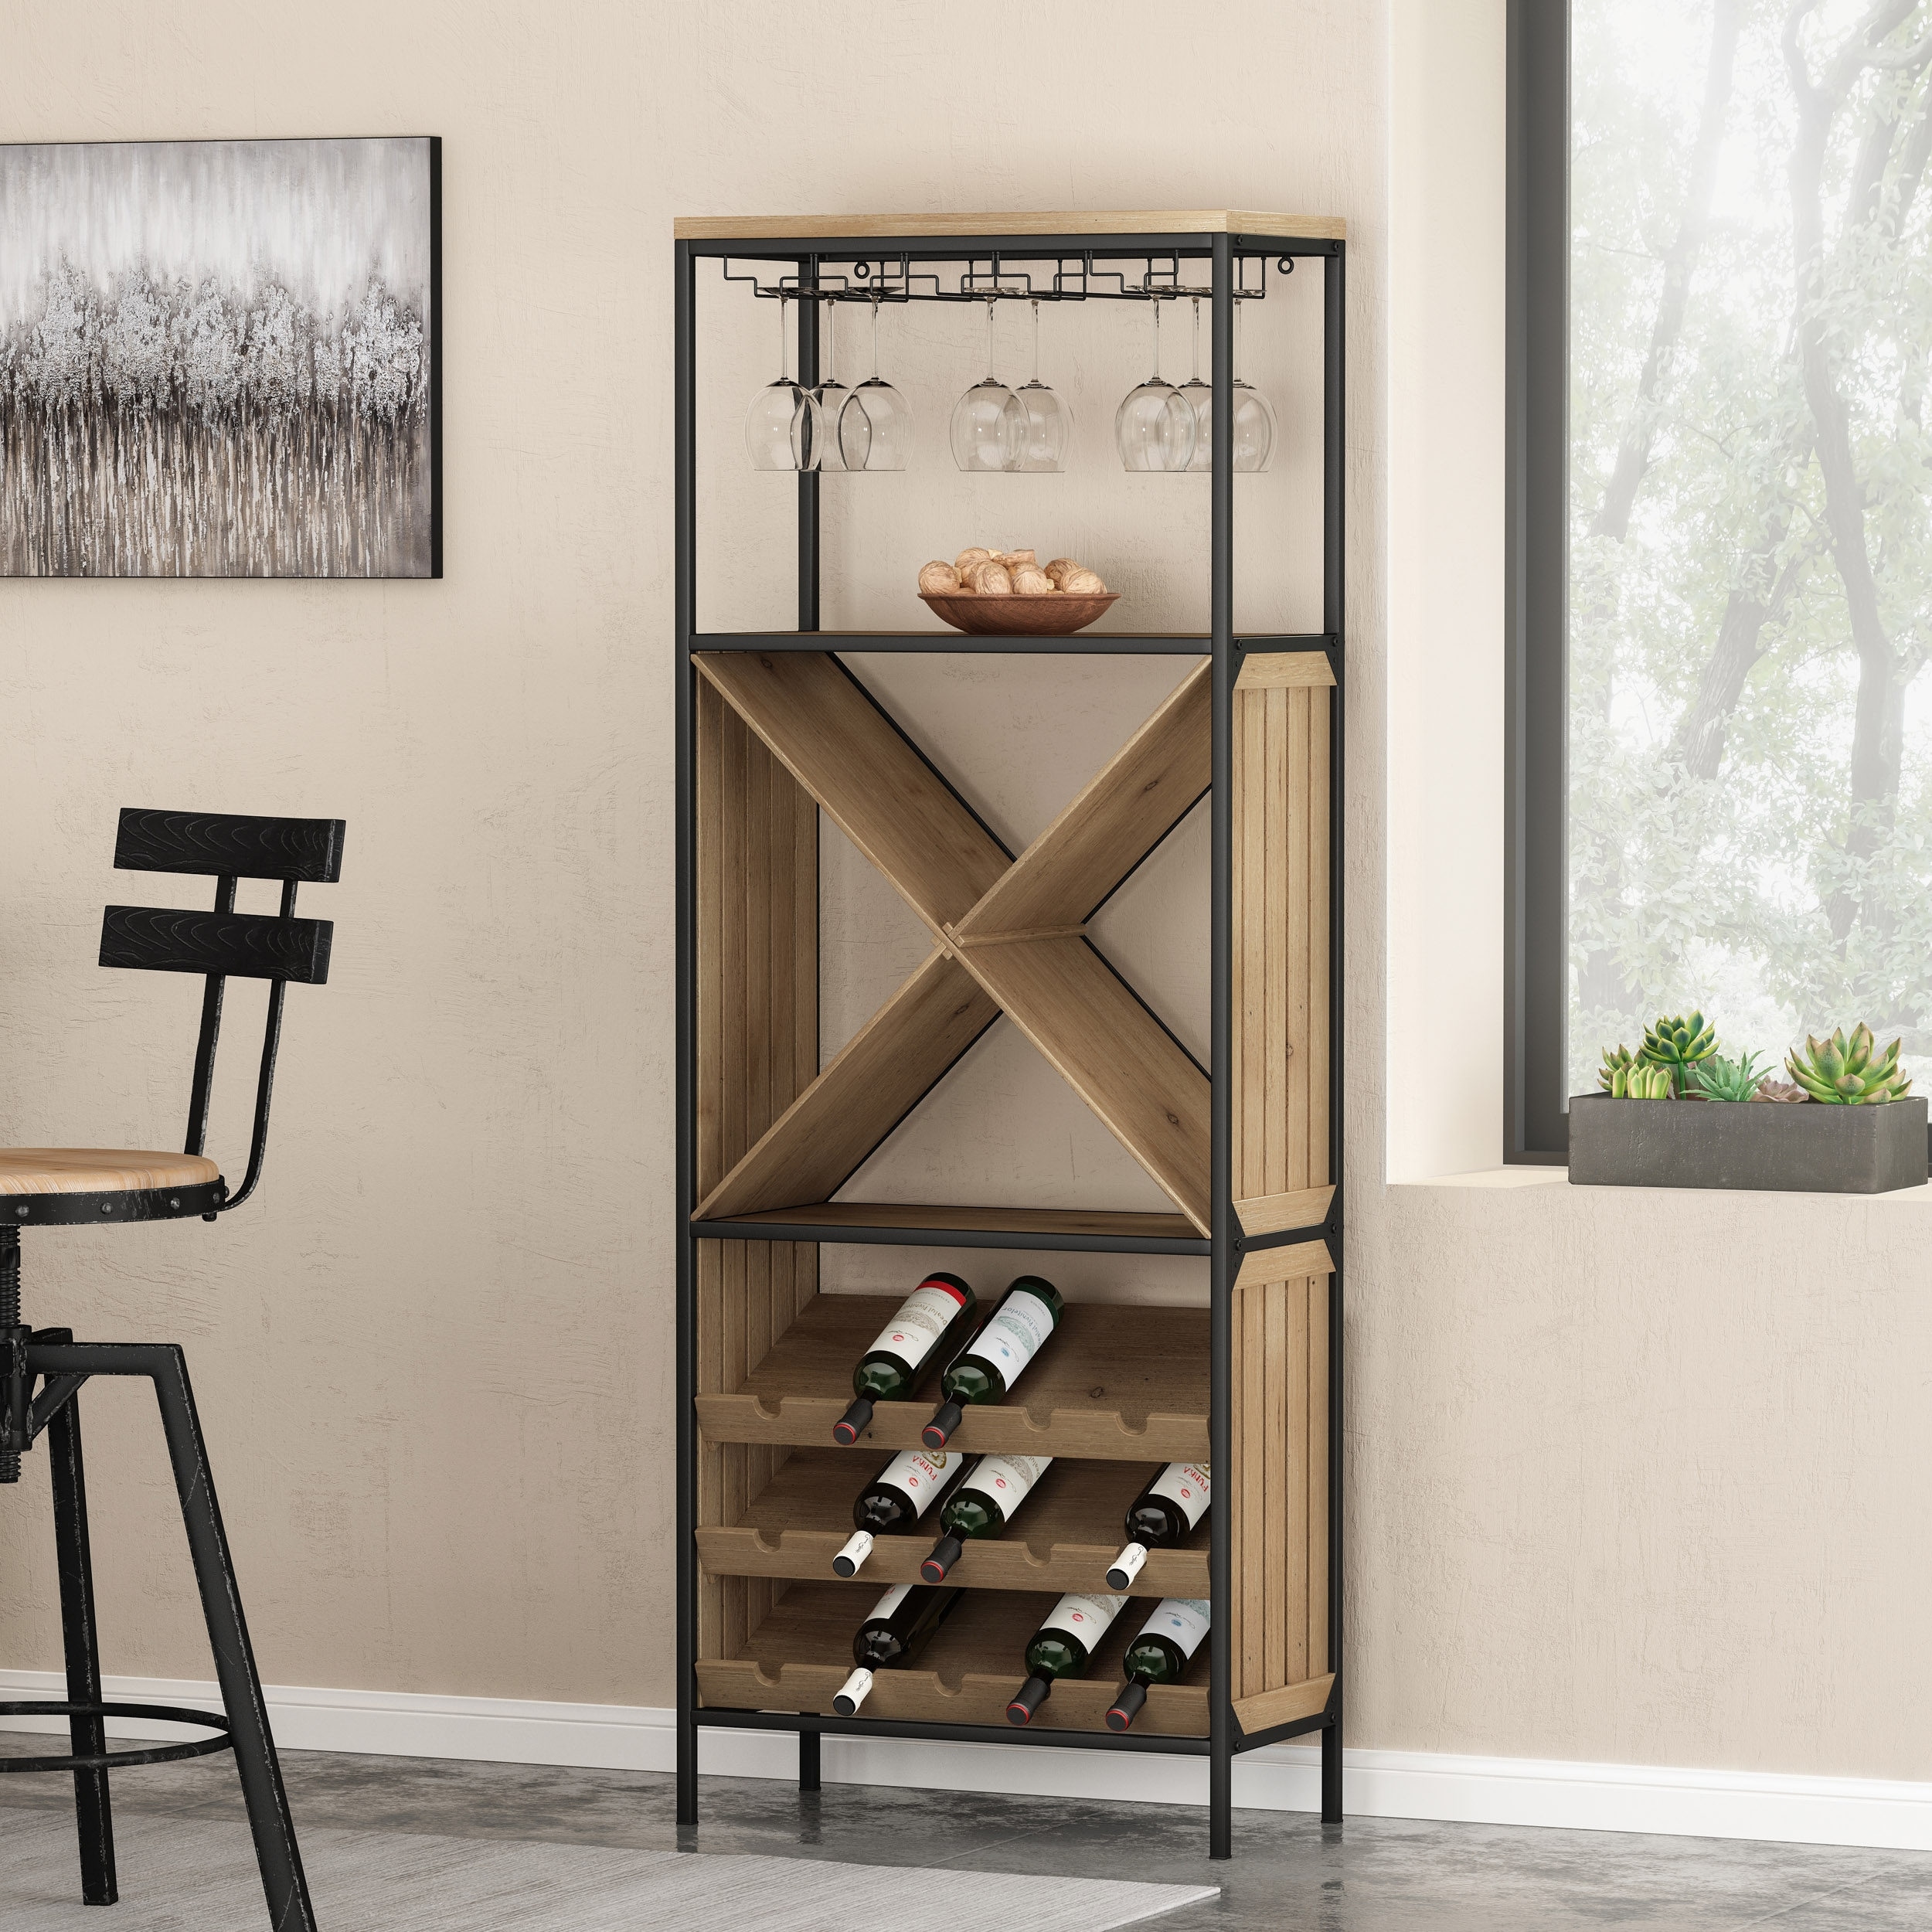 https://ak1.ostkcdn.com/images/products/is/images/direct/d44e480e634dd053b0eb2ca38190869935be7ab9/Fritsche-15-Bottle-Floor-Wine-Rack-by-Christopher-Knight-Home.jpg